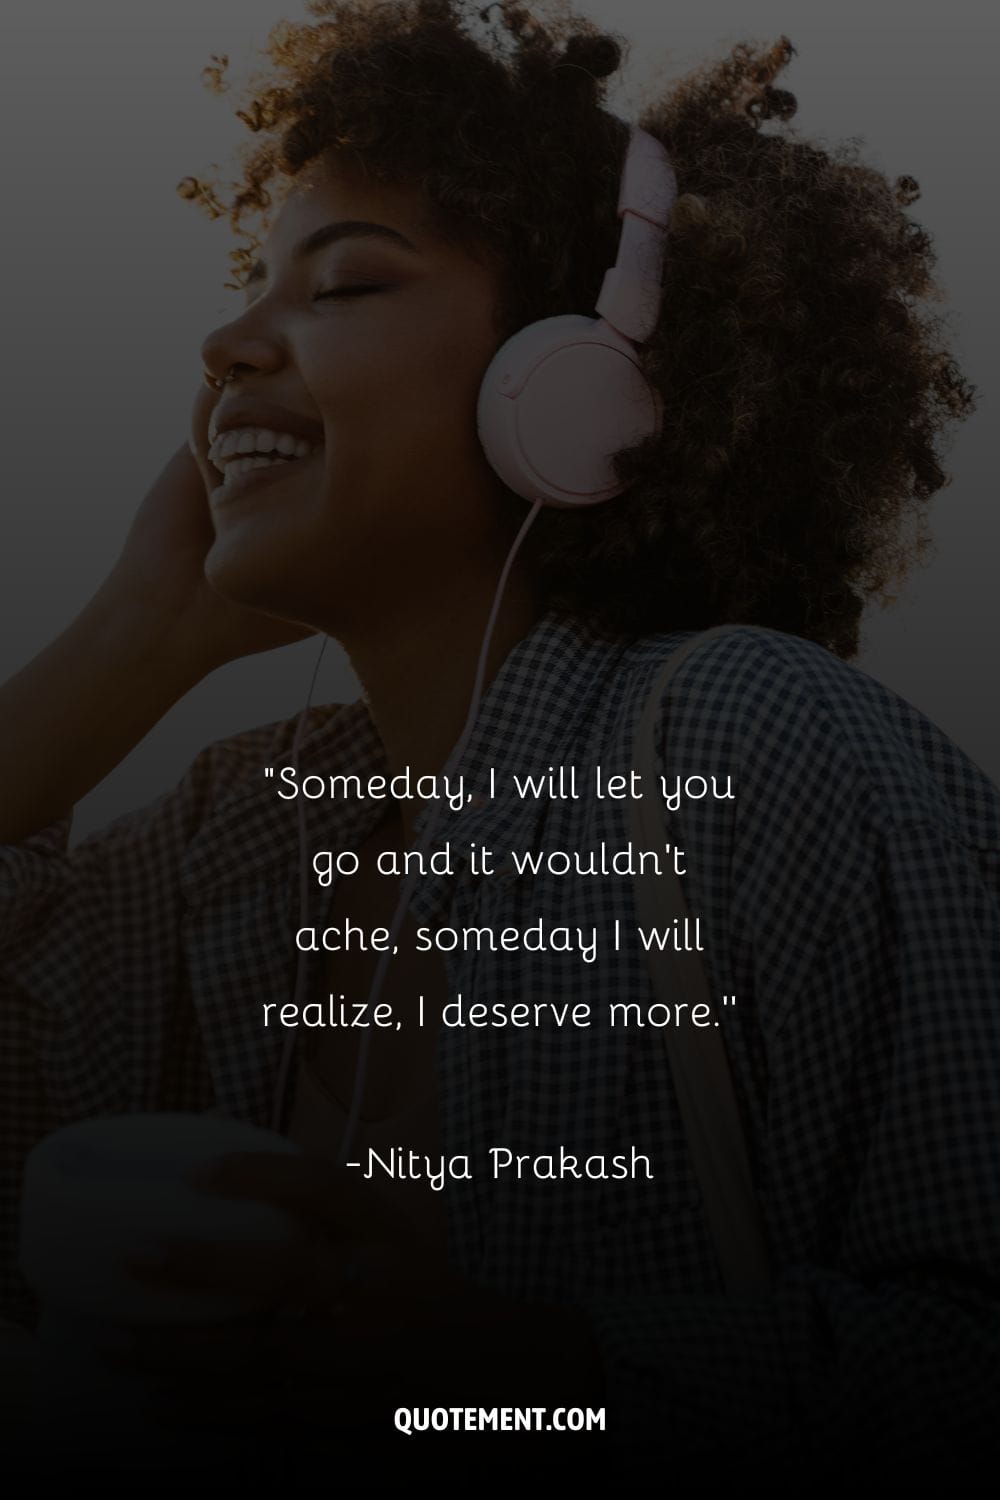 young black girl in headphones representing the greatest I deserve quote